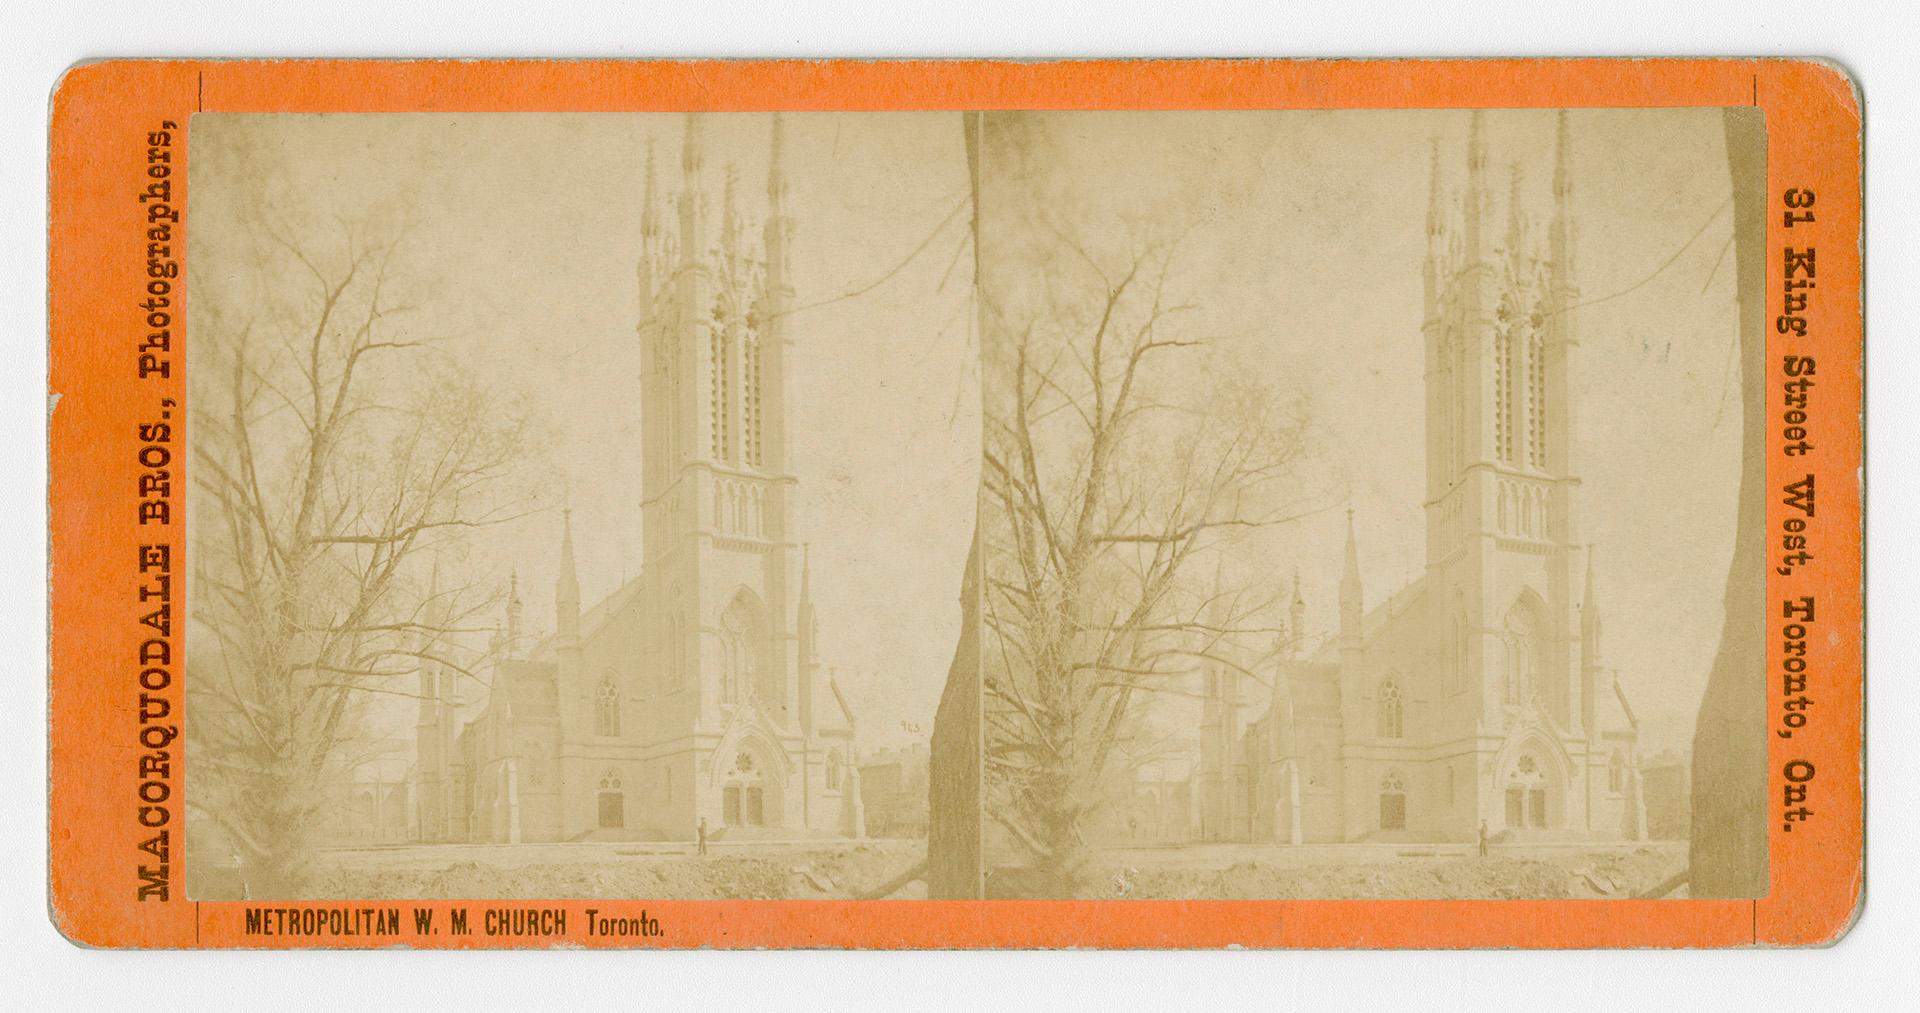 Pictures show a large gothic church with a central steeple.